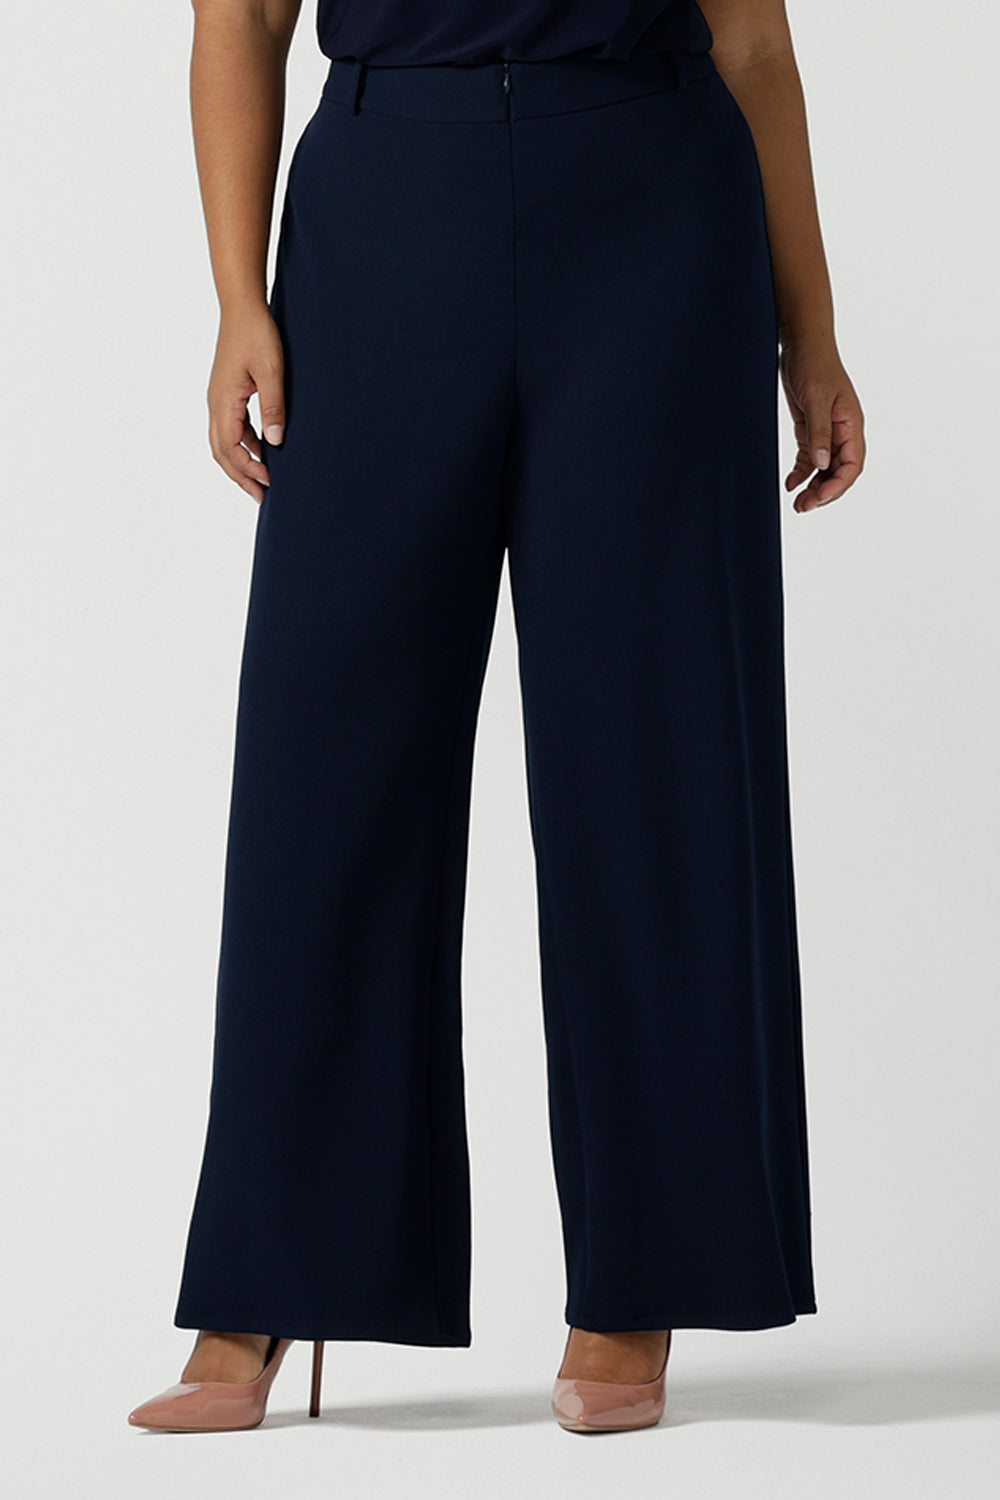 Close up of a size 10 model wears the Navy wide leg pant with navy scuba crepe. High waisted and tailored with belt loops. Stylish and corporate workwear for women size 8 - 24.. Made in Australia.